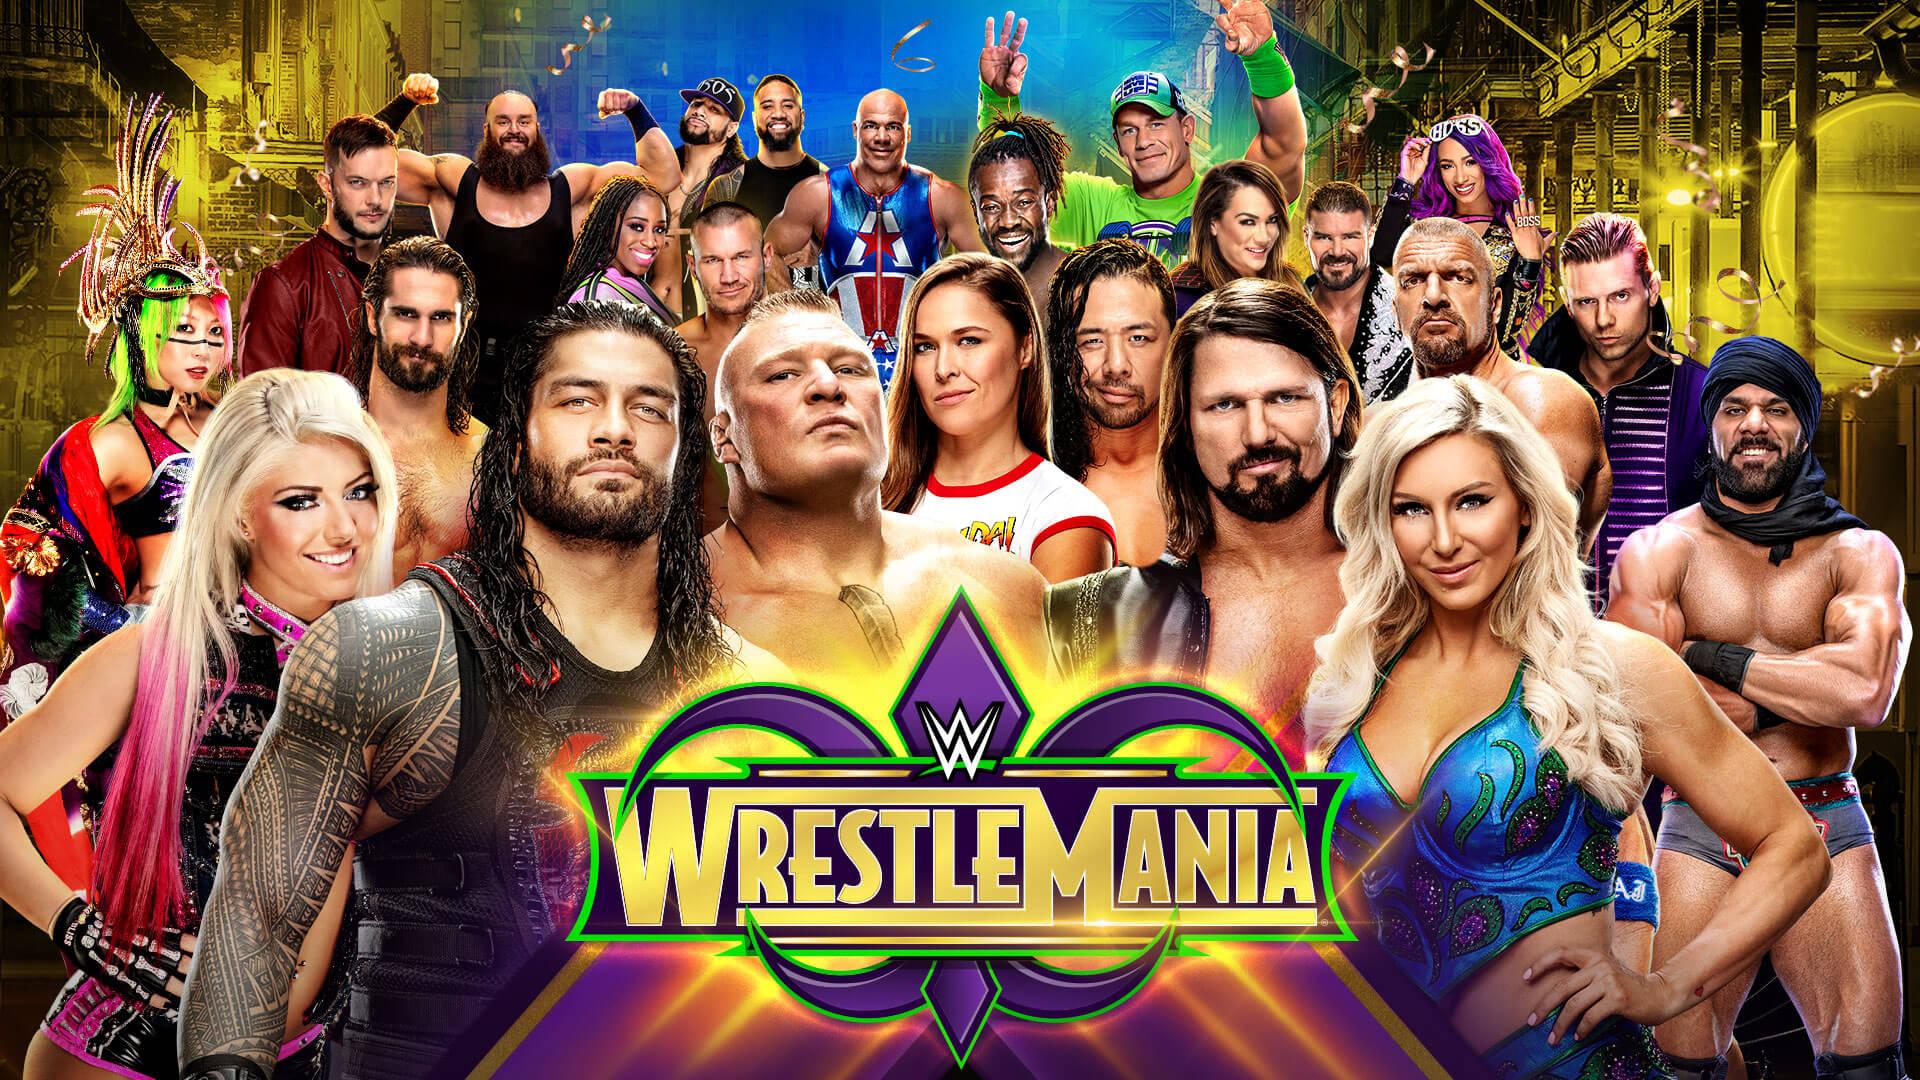 Check Out WrestleMania 34 Results